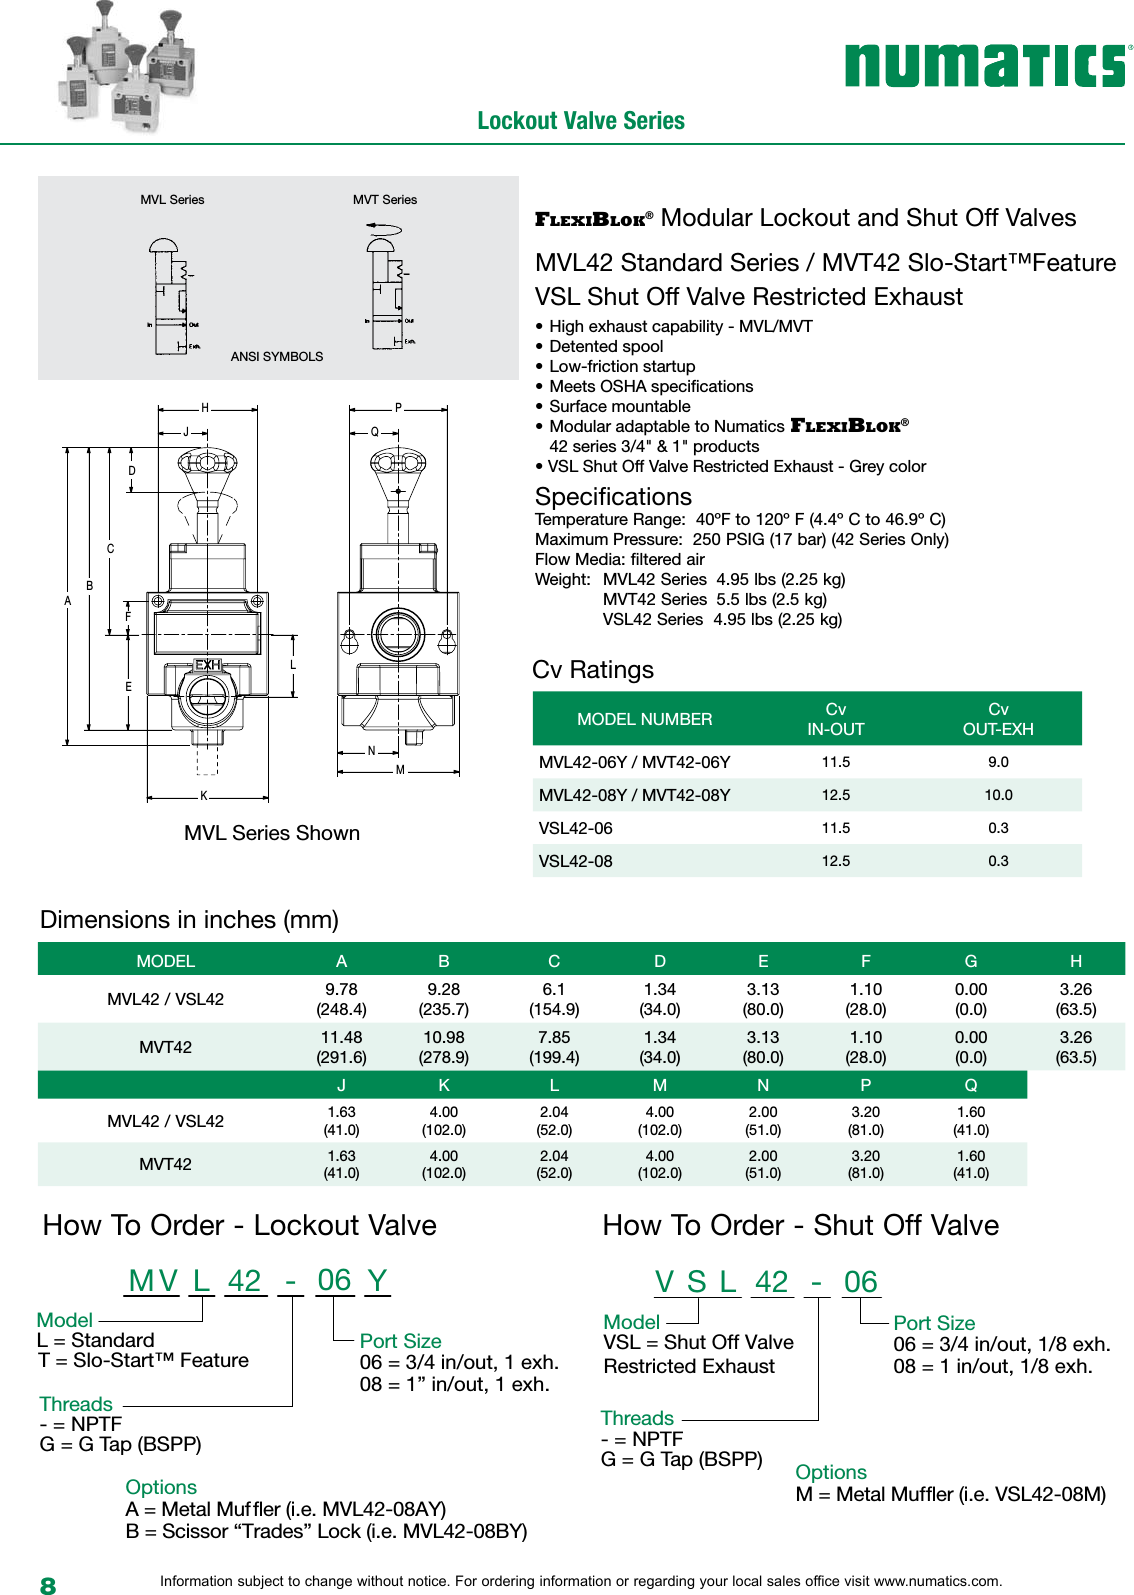 Page 10 of 12 - Flow Numatic Lockout Series-1505484633 User Manual